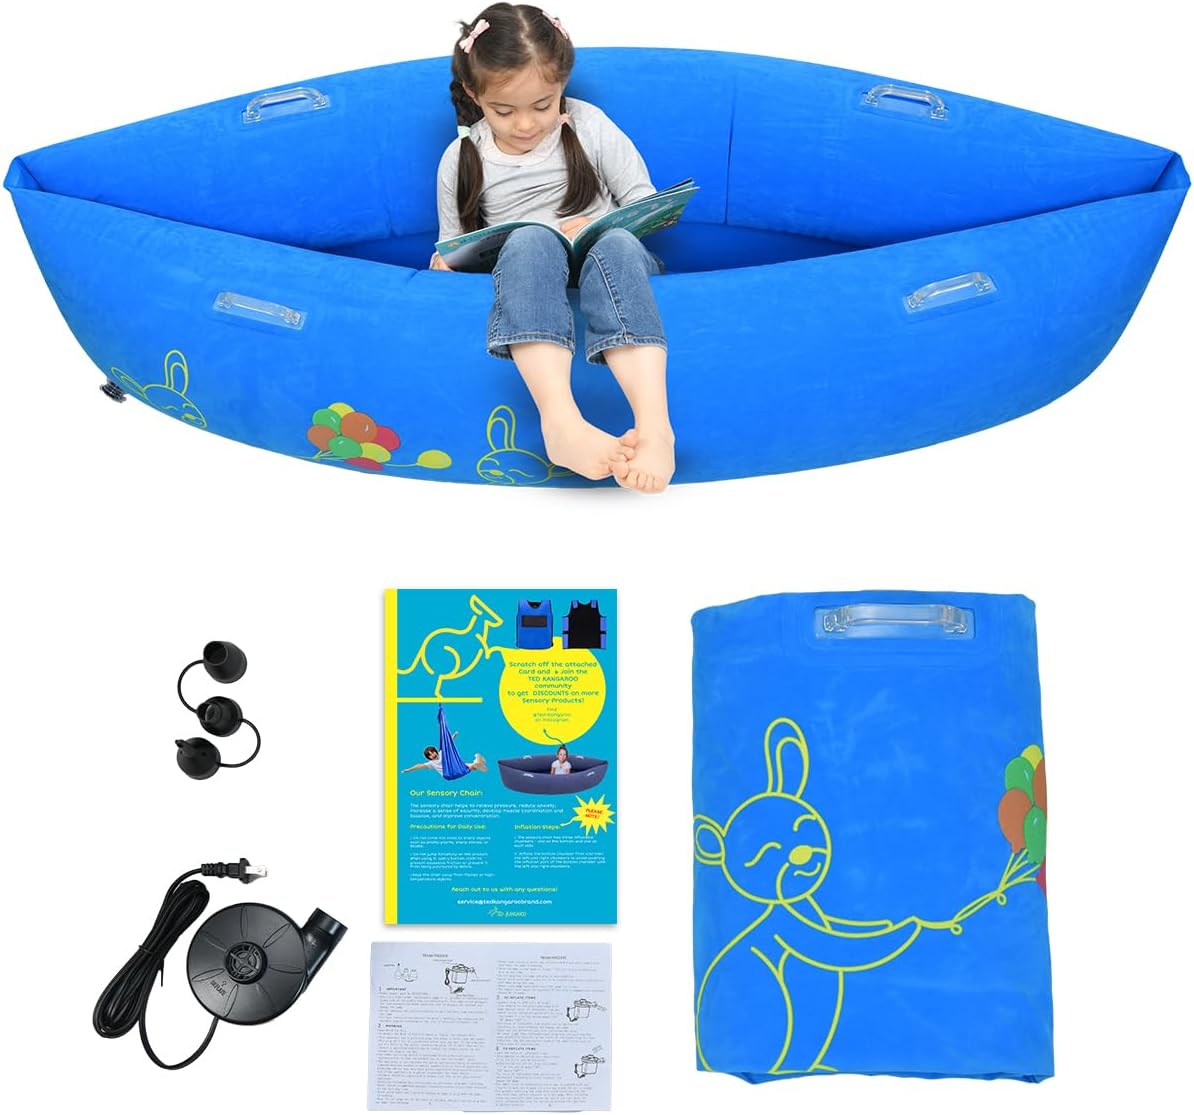 Ted Kangaroo Sensory Chair for Kids with Autism - Inflatable Chair Pod & Inflatable Therapeutic Peapod, Sensory Toys for Autistic Children, Includes Electric Air Pump